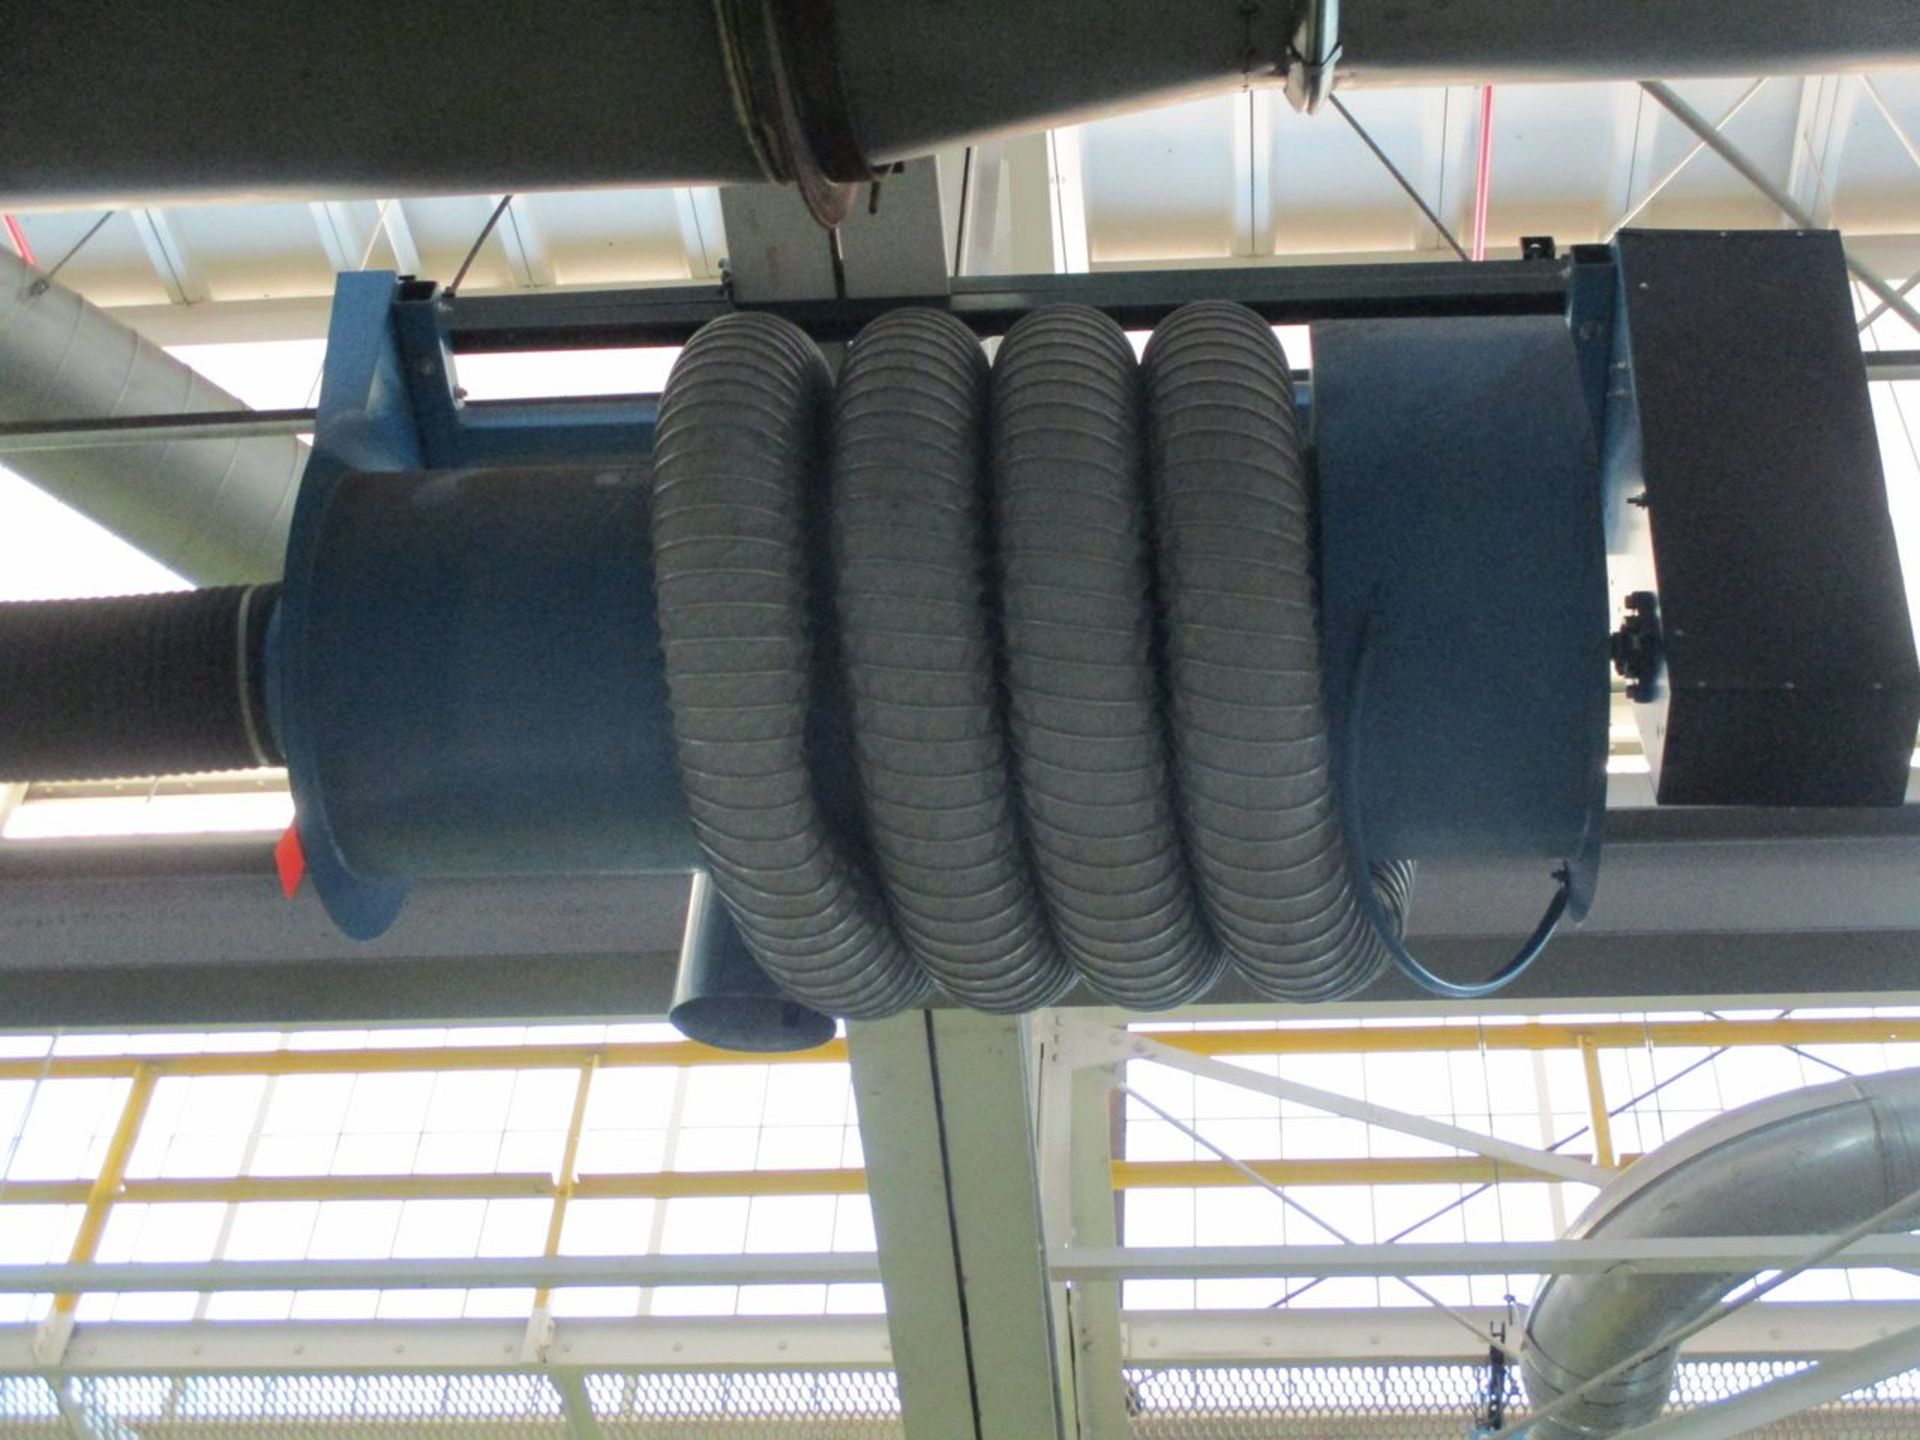 (2) Car-Mon Spring Operated Exhaust Tubing Storage Reel, model TSR-S (Ceiling Mounted) (Chassis Dyno - Image 2 of 2